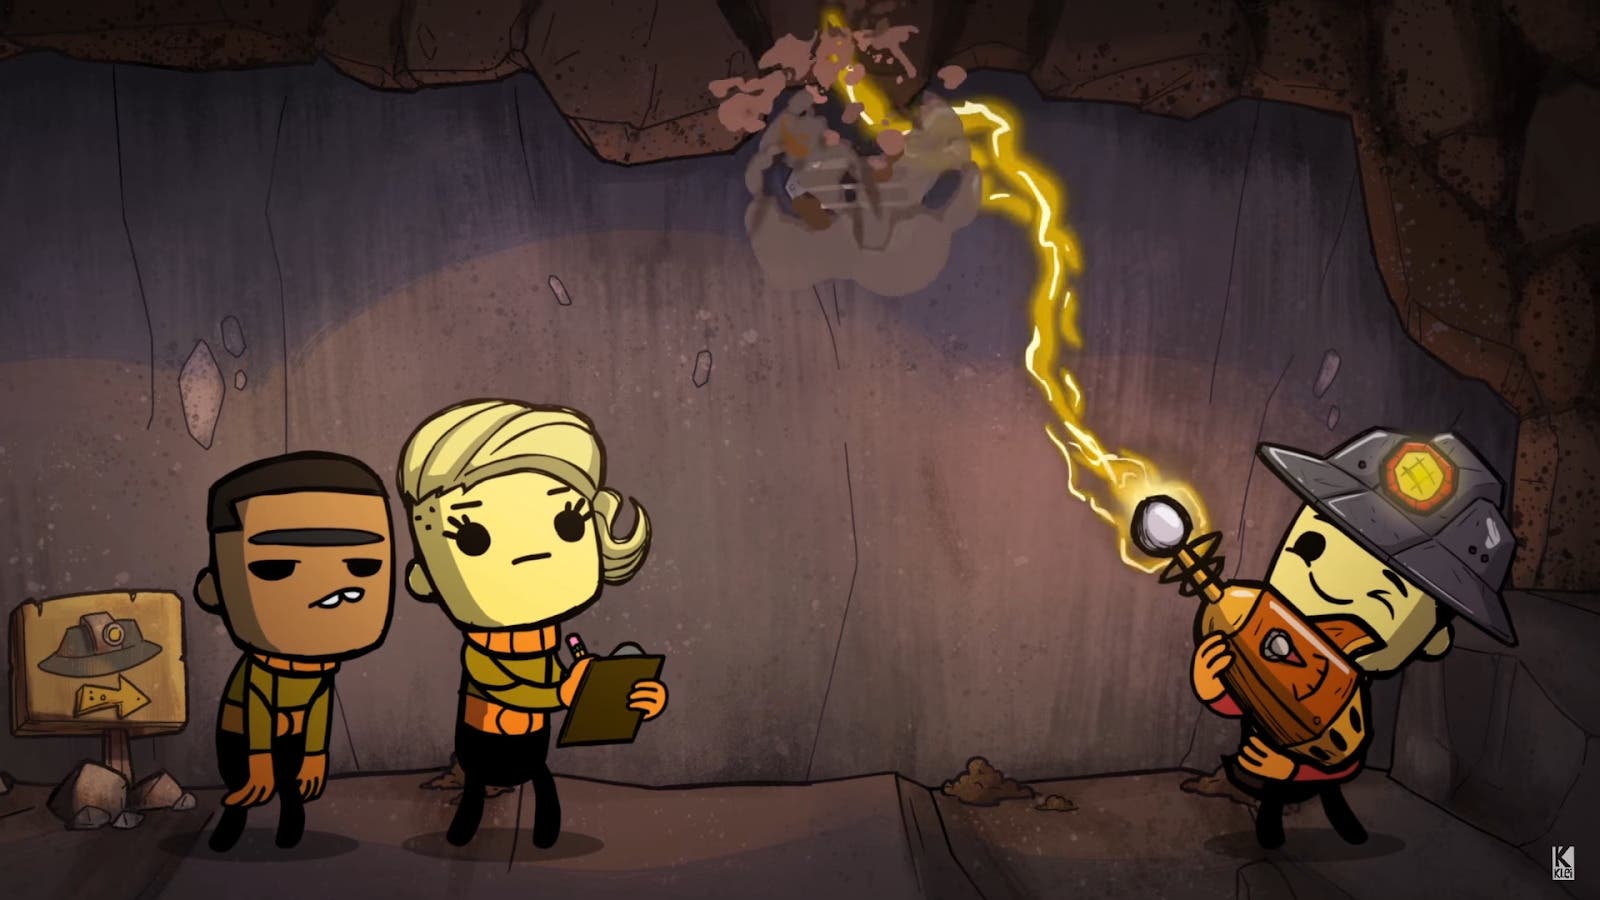 Oxygen Not Included for ios instal